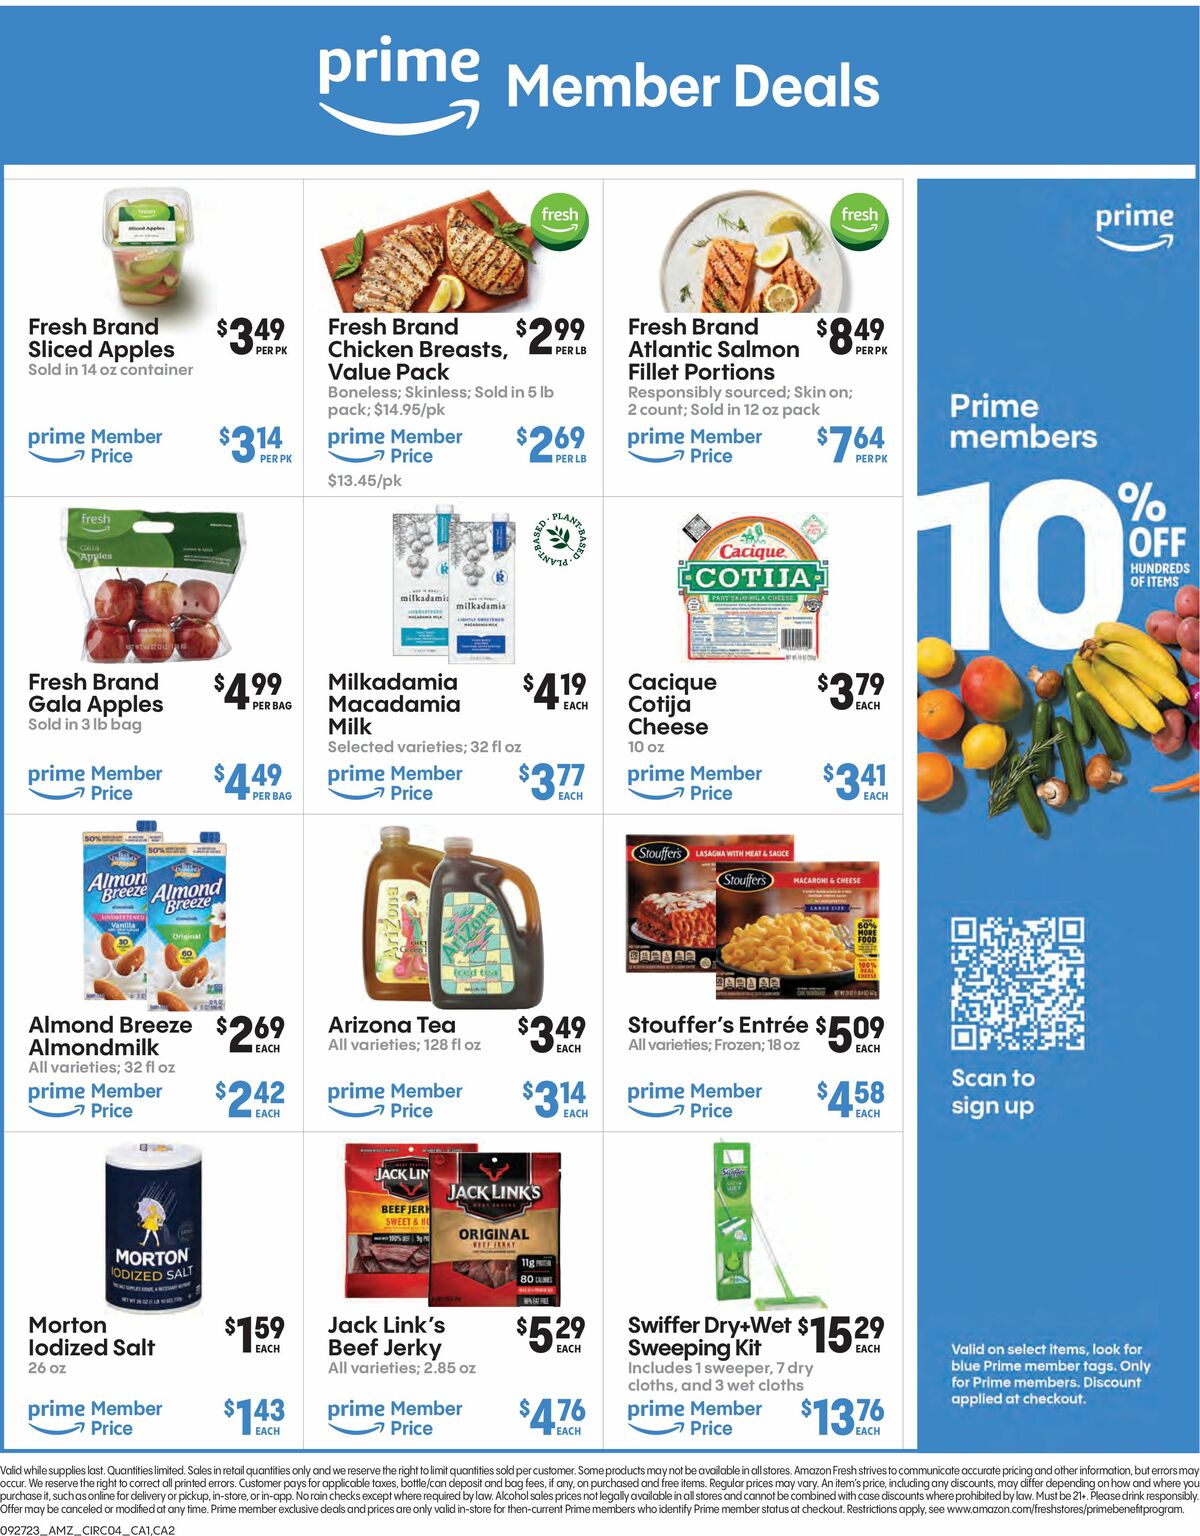 Amazon Fresh Weekly Ad from September 27